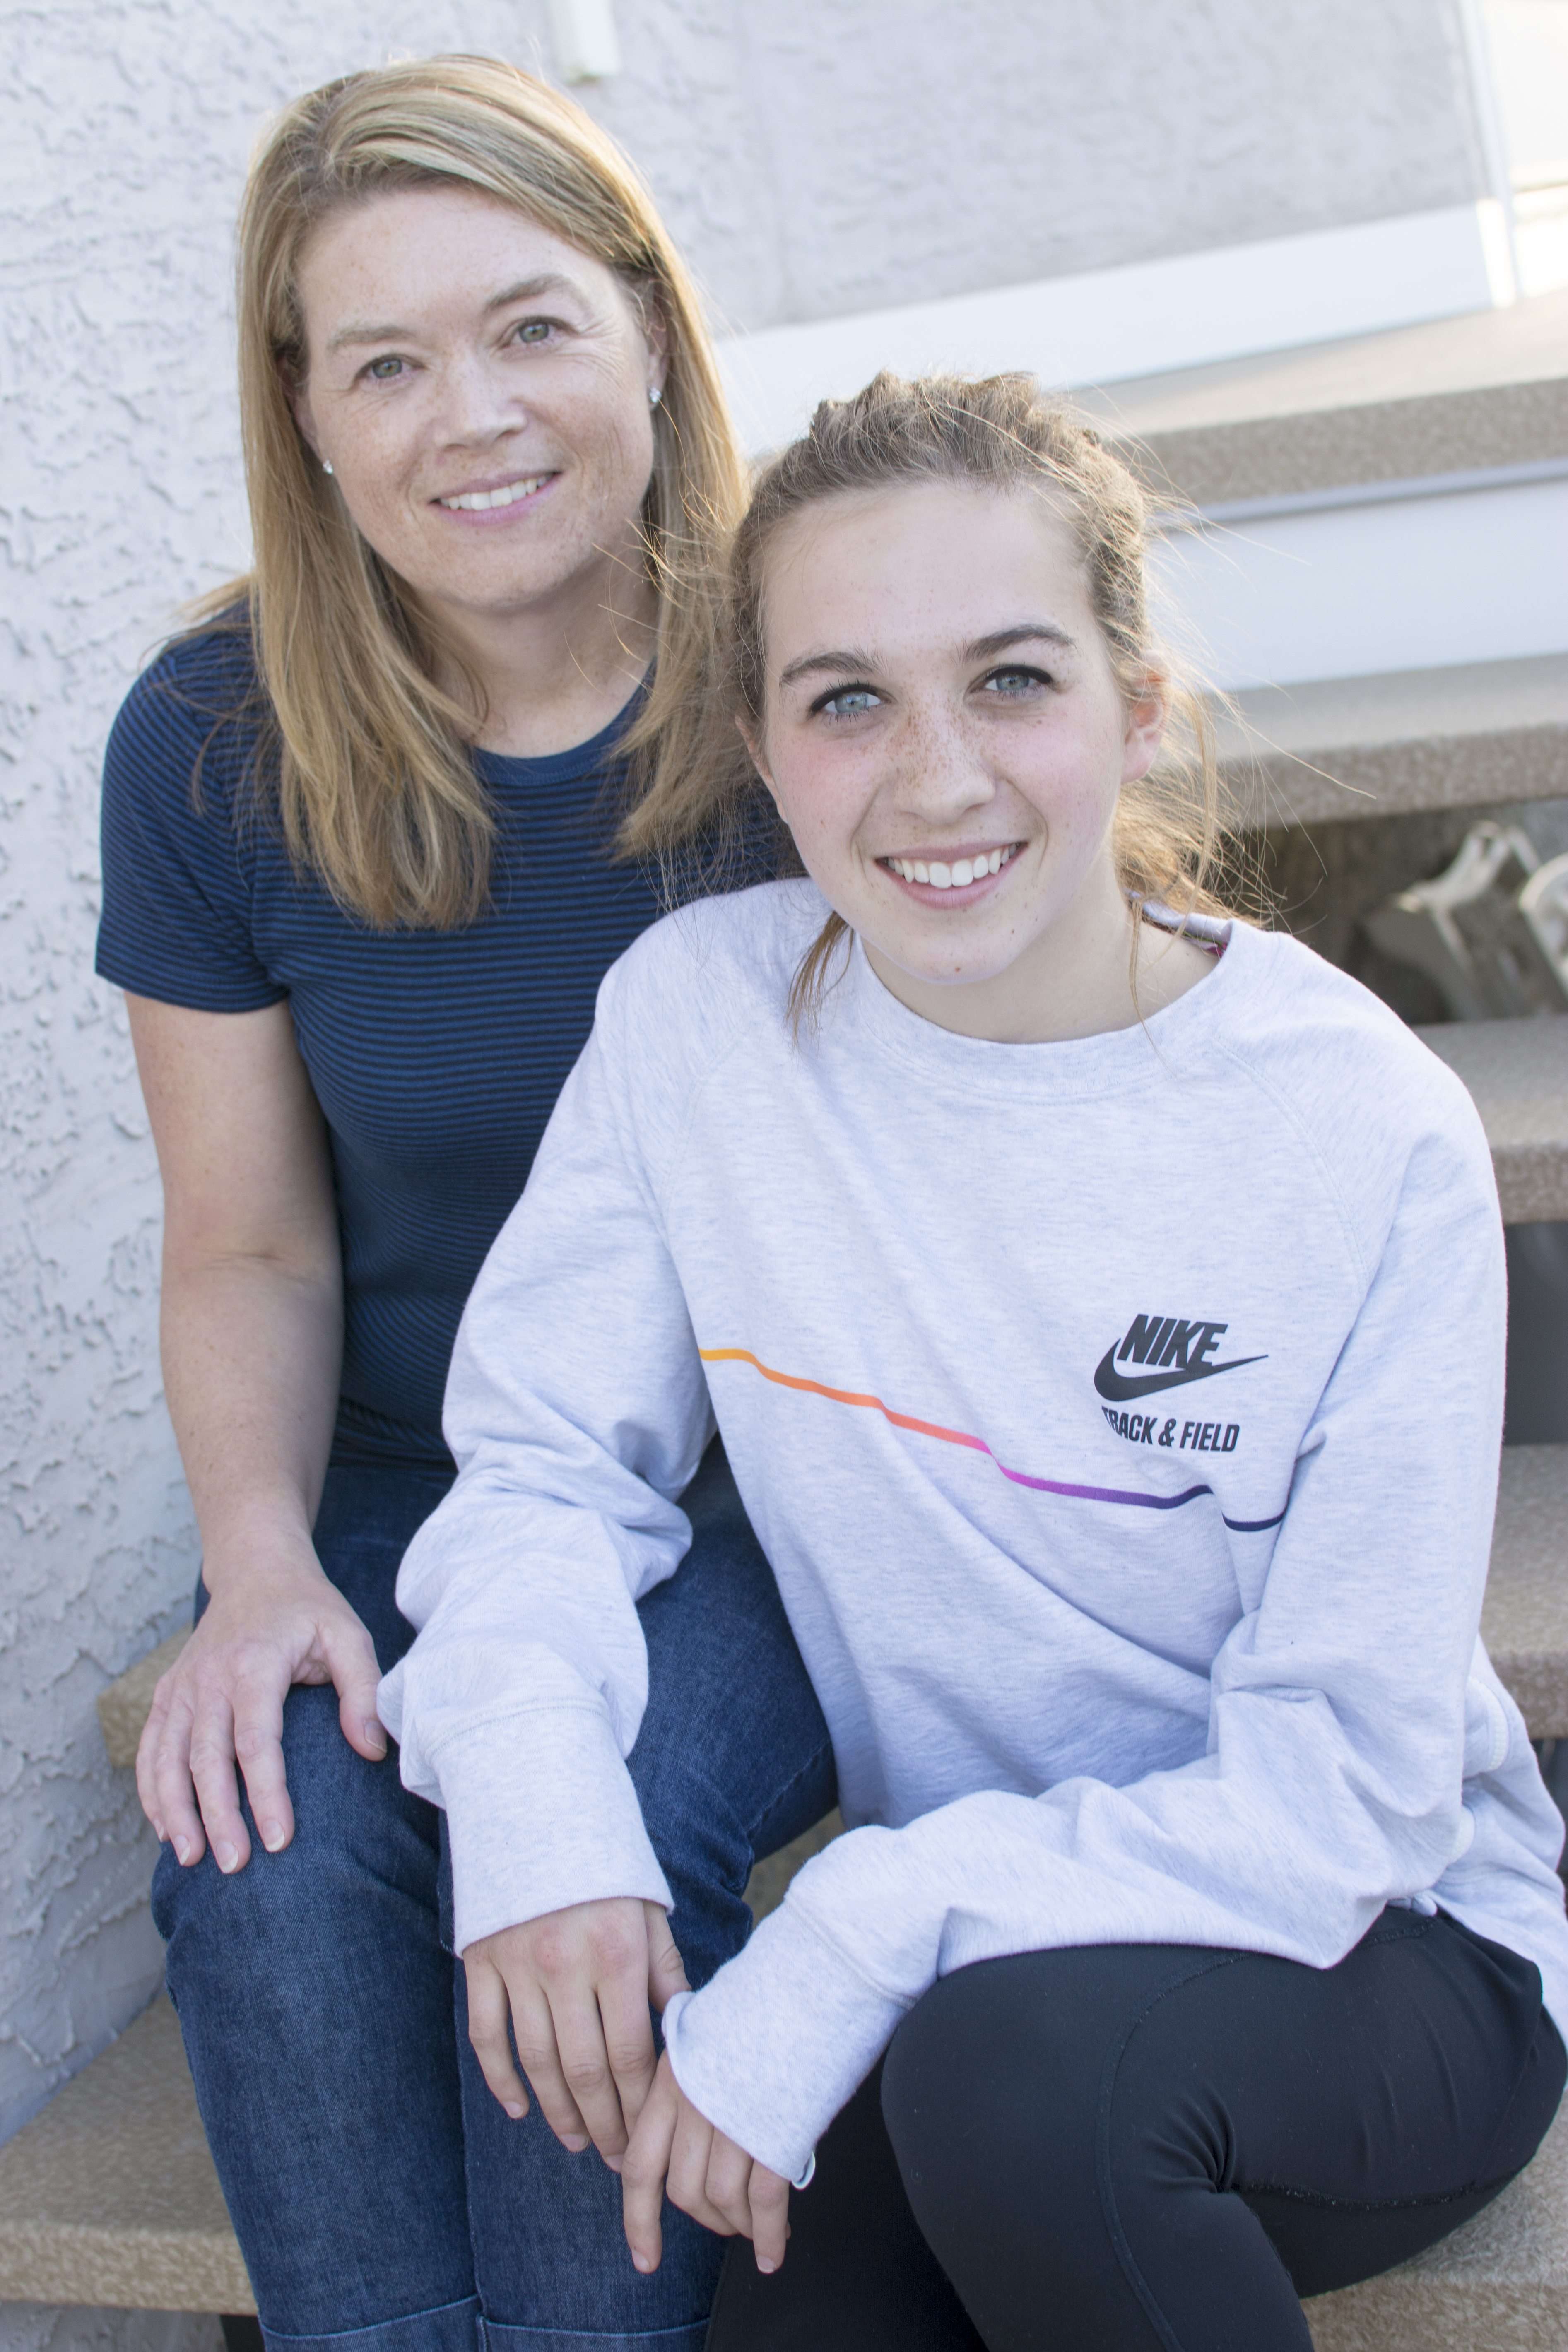 BRIGHT FUTURE - Dawn Iatrou and her daughter Dina enjoy some time together in the backyard of their Deer Park home. Dina recently learned she has landed a scholarship for her coming university studies thanks to her passion for running – something she shares with her mother.